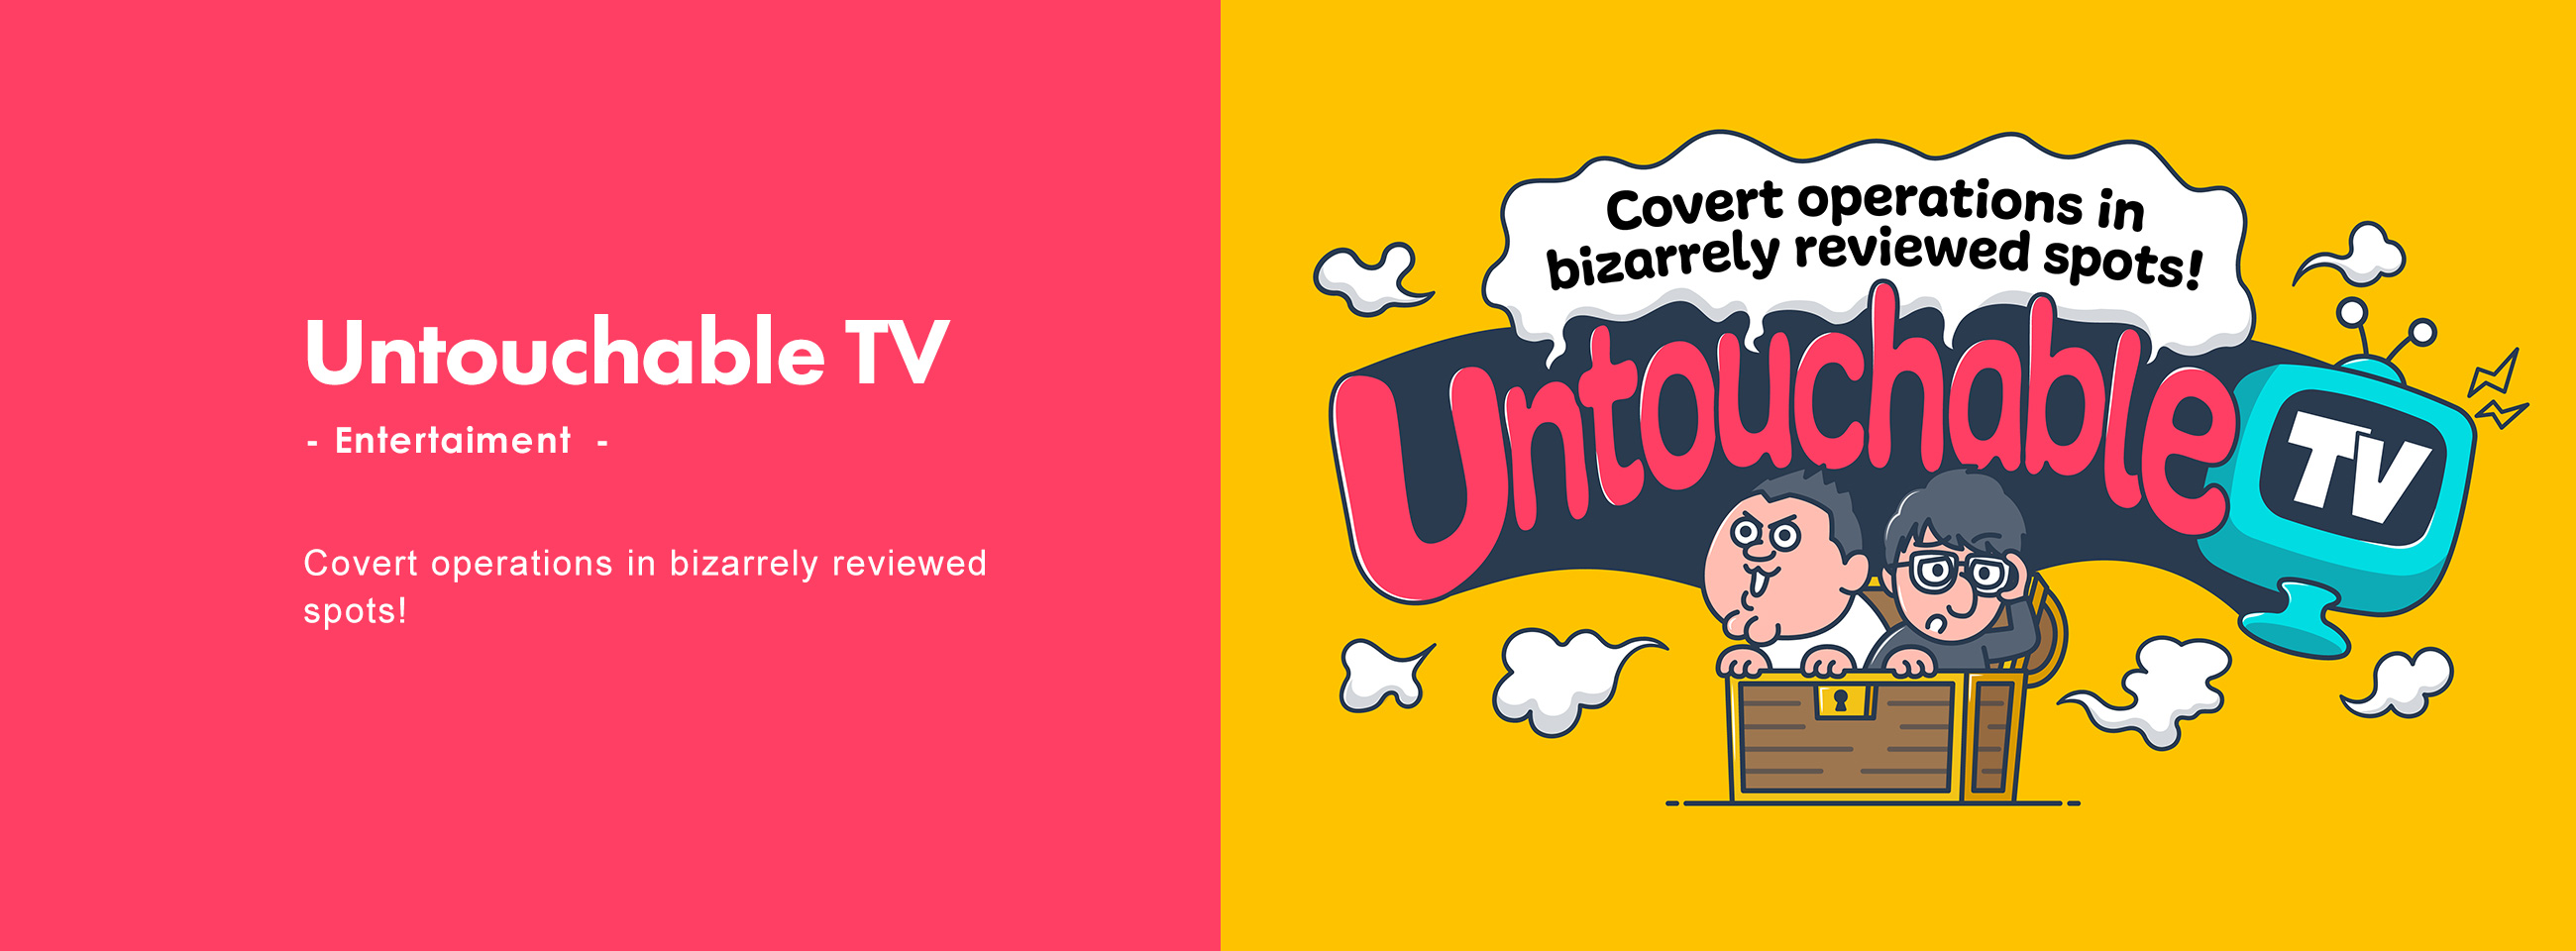 Untouchable TV - Entertainment - Covert operations in bizarrely reviewed spots!